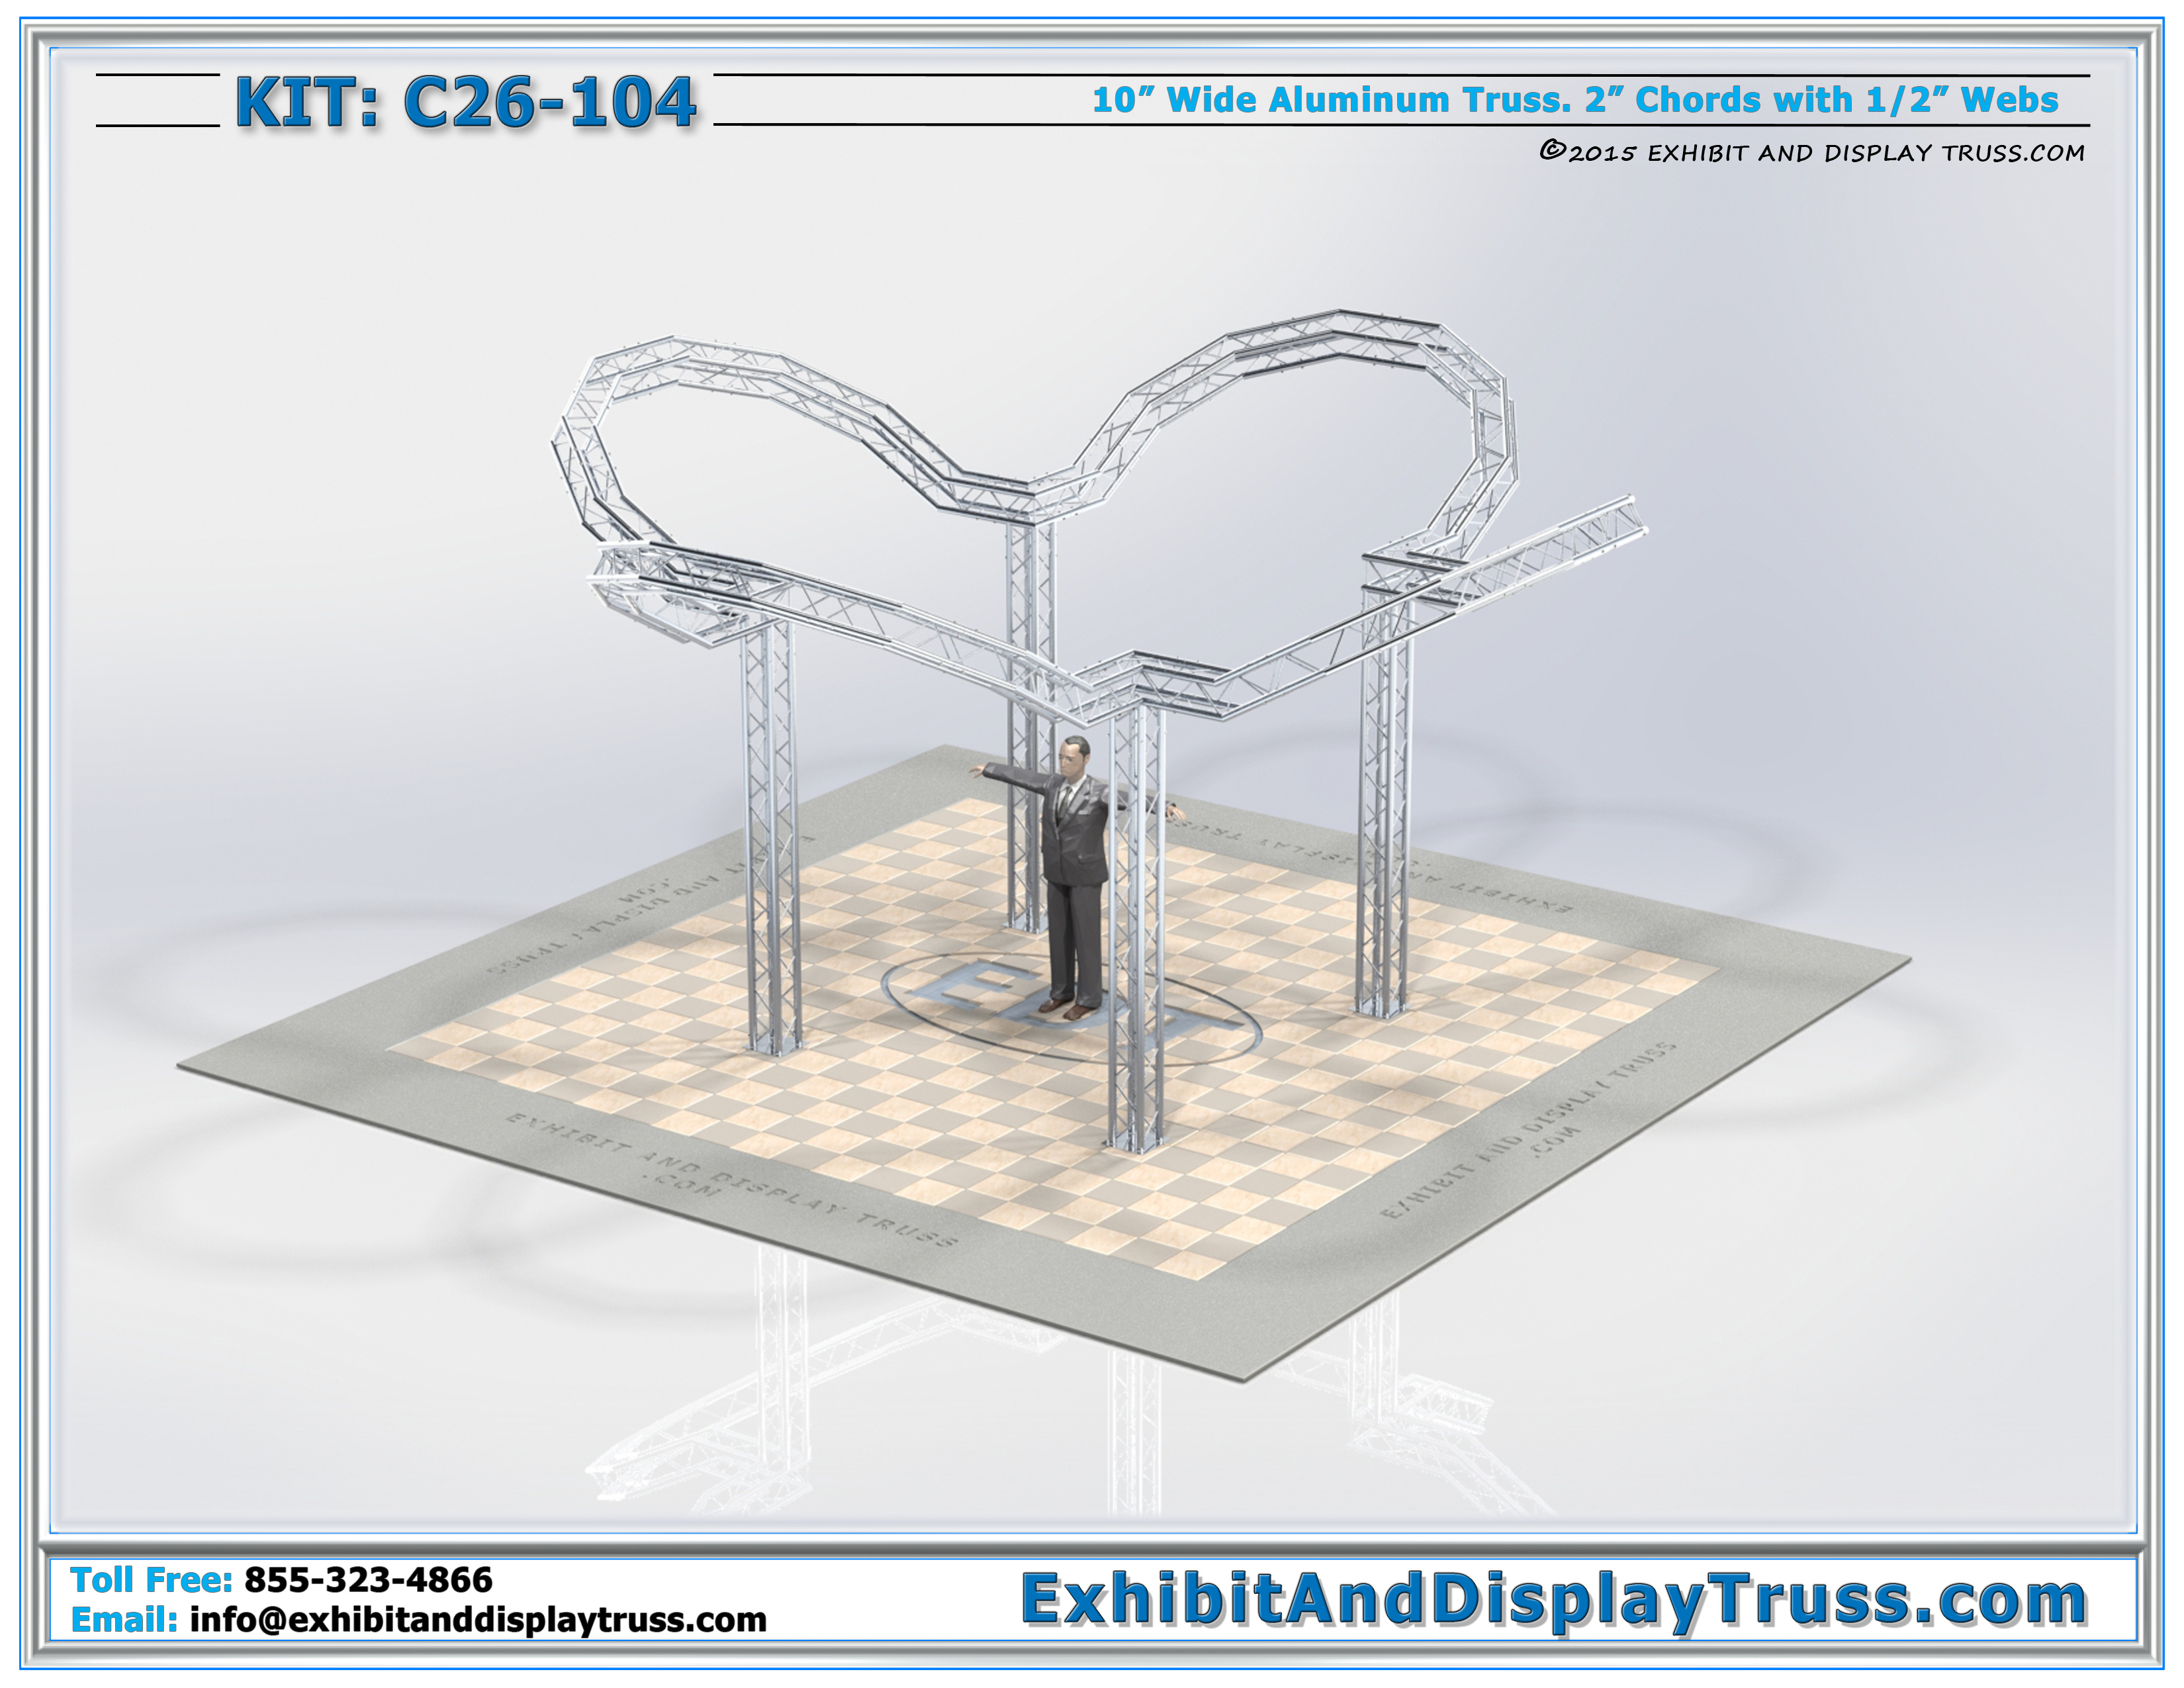 All Other Sizes | Large Exhibition Exhibit Display Booths. Exhibit Display Kits for Larger than 20